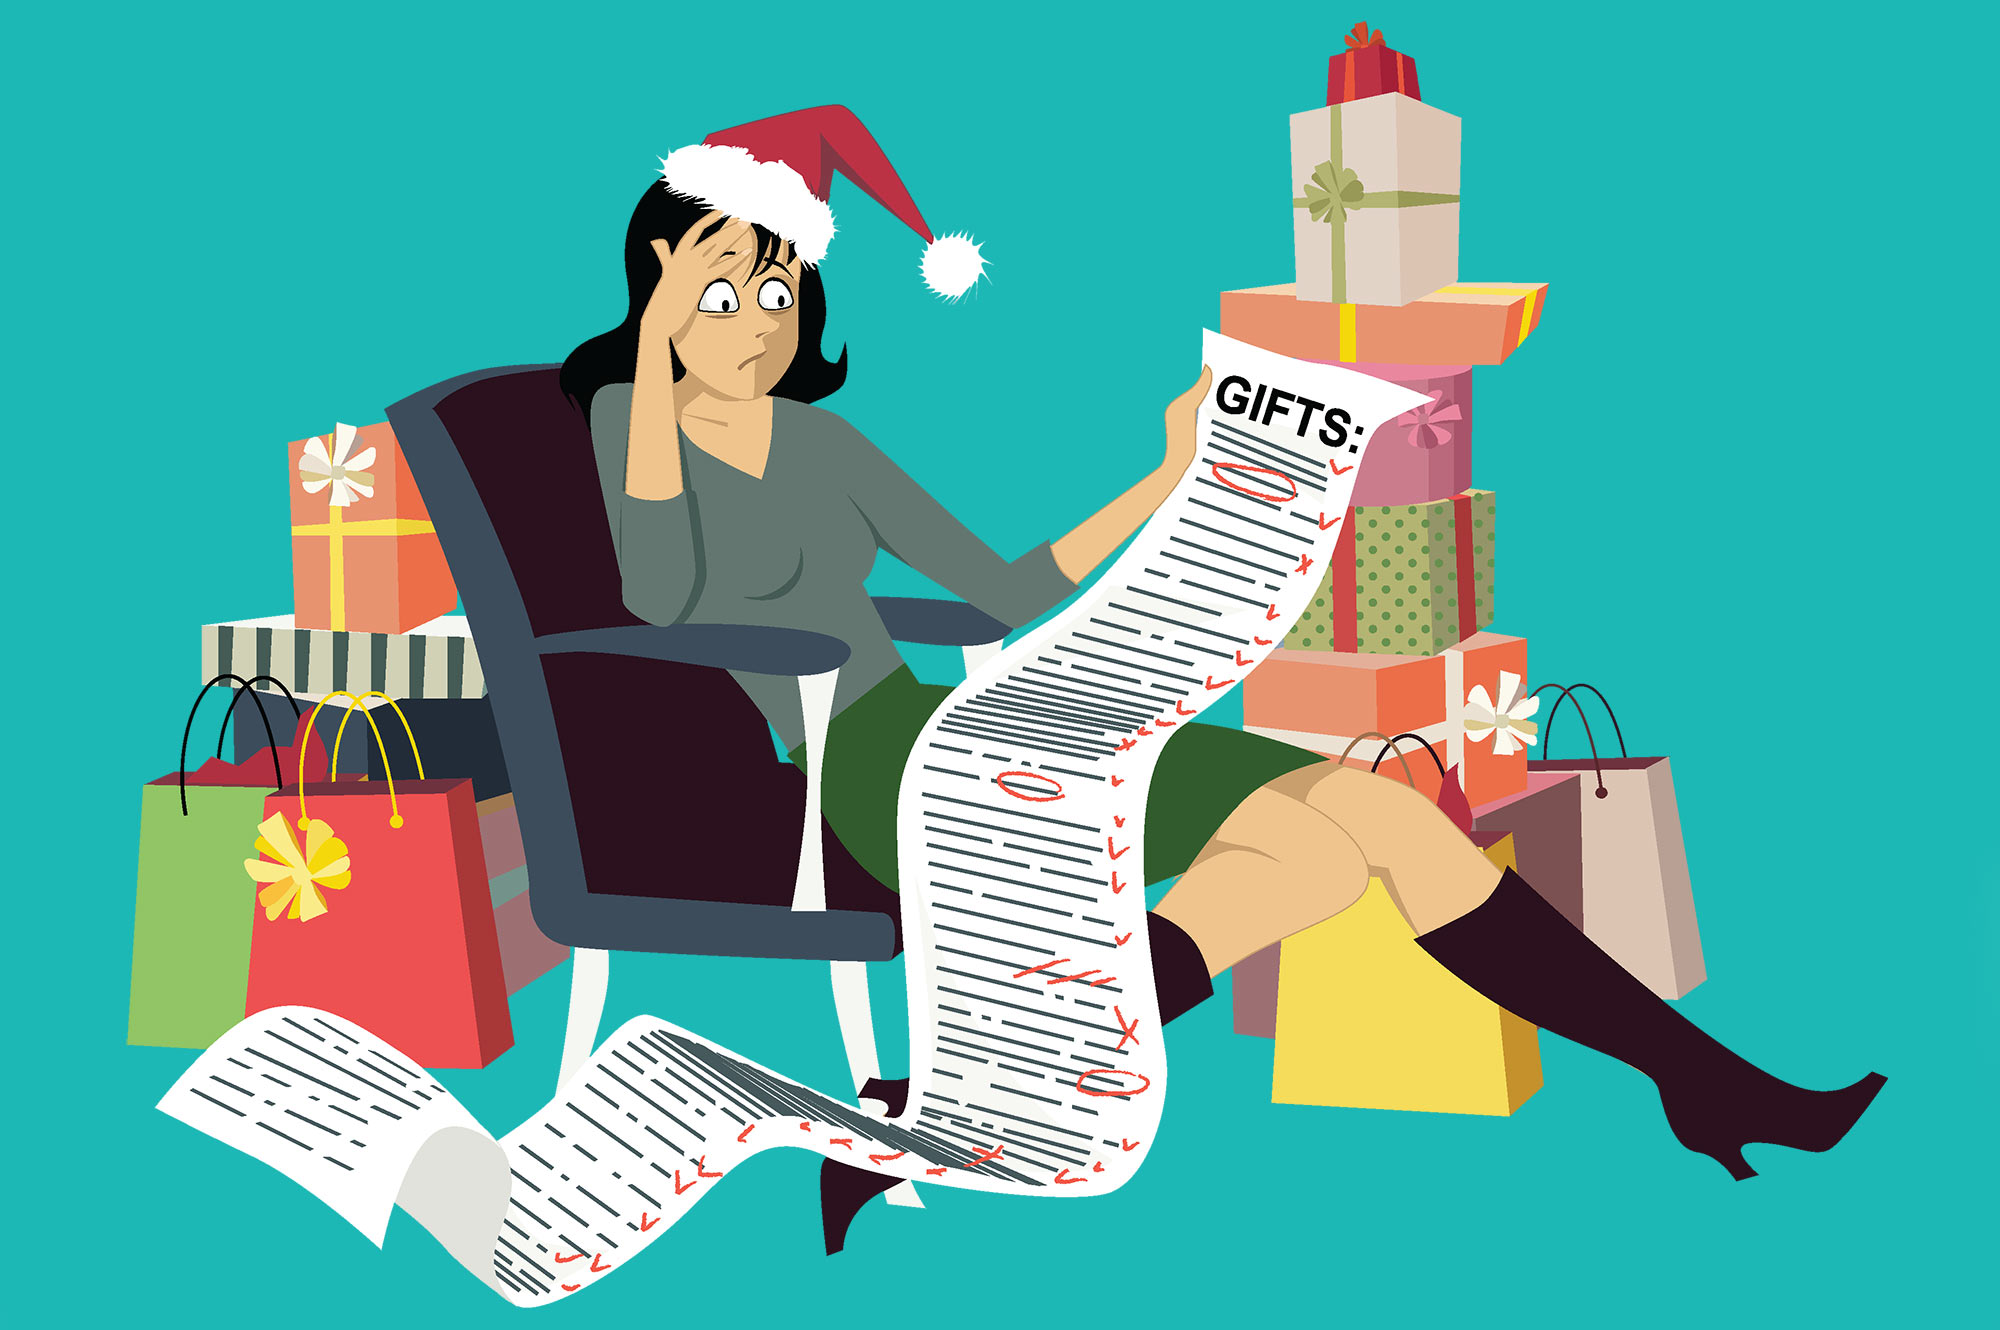 Black Friday Preparation: Tips to Keep Holidays Higher in Fun and Lower in Stress